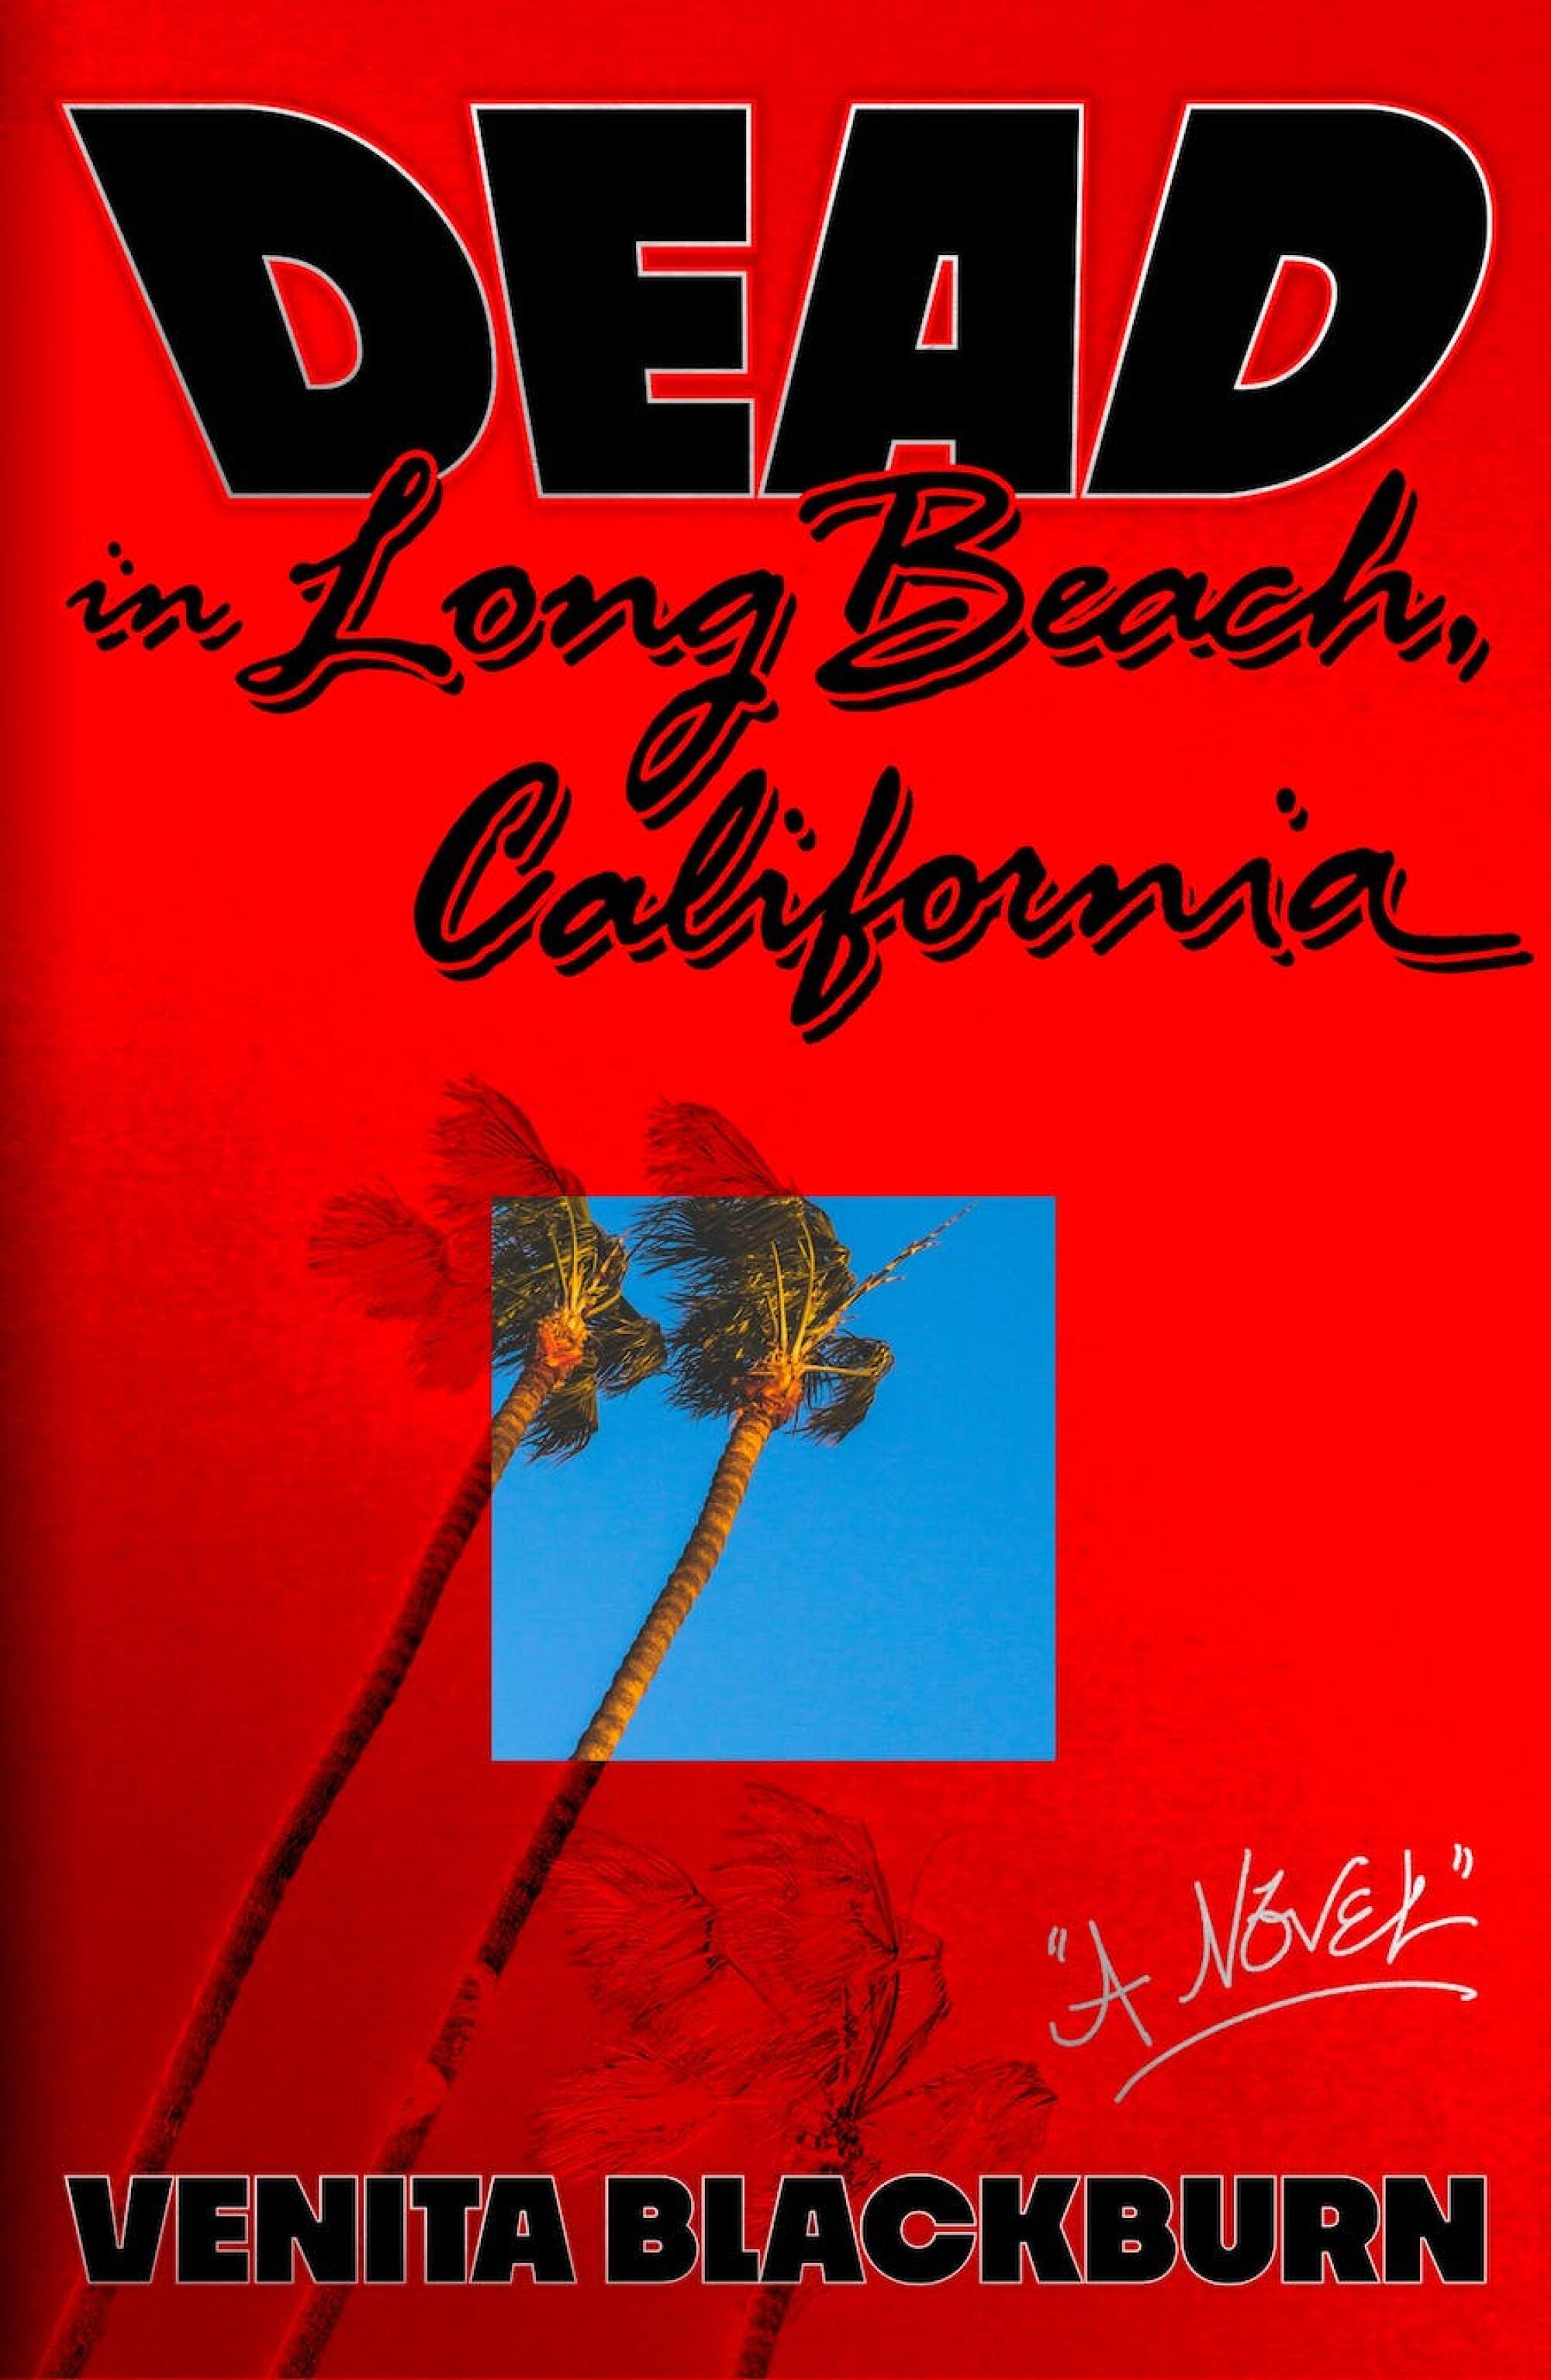 The cover of "Dead in Long Beach, California" shows palm trees surrounded by a crimson, red frame.